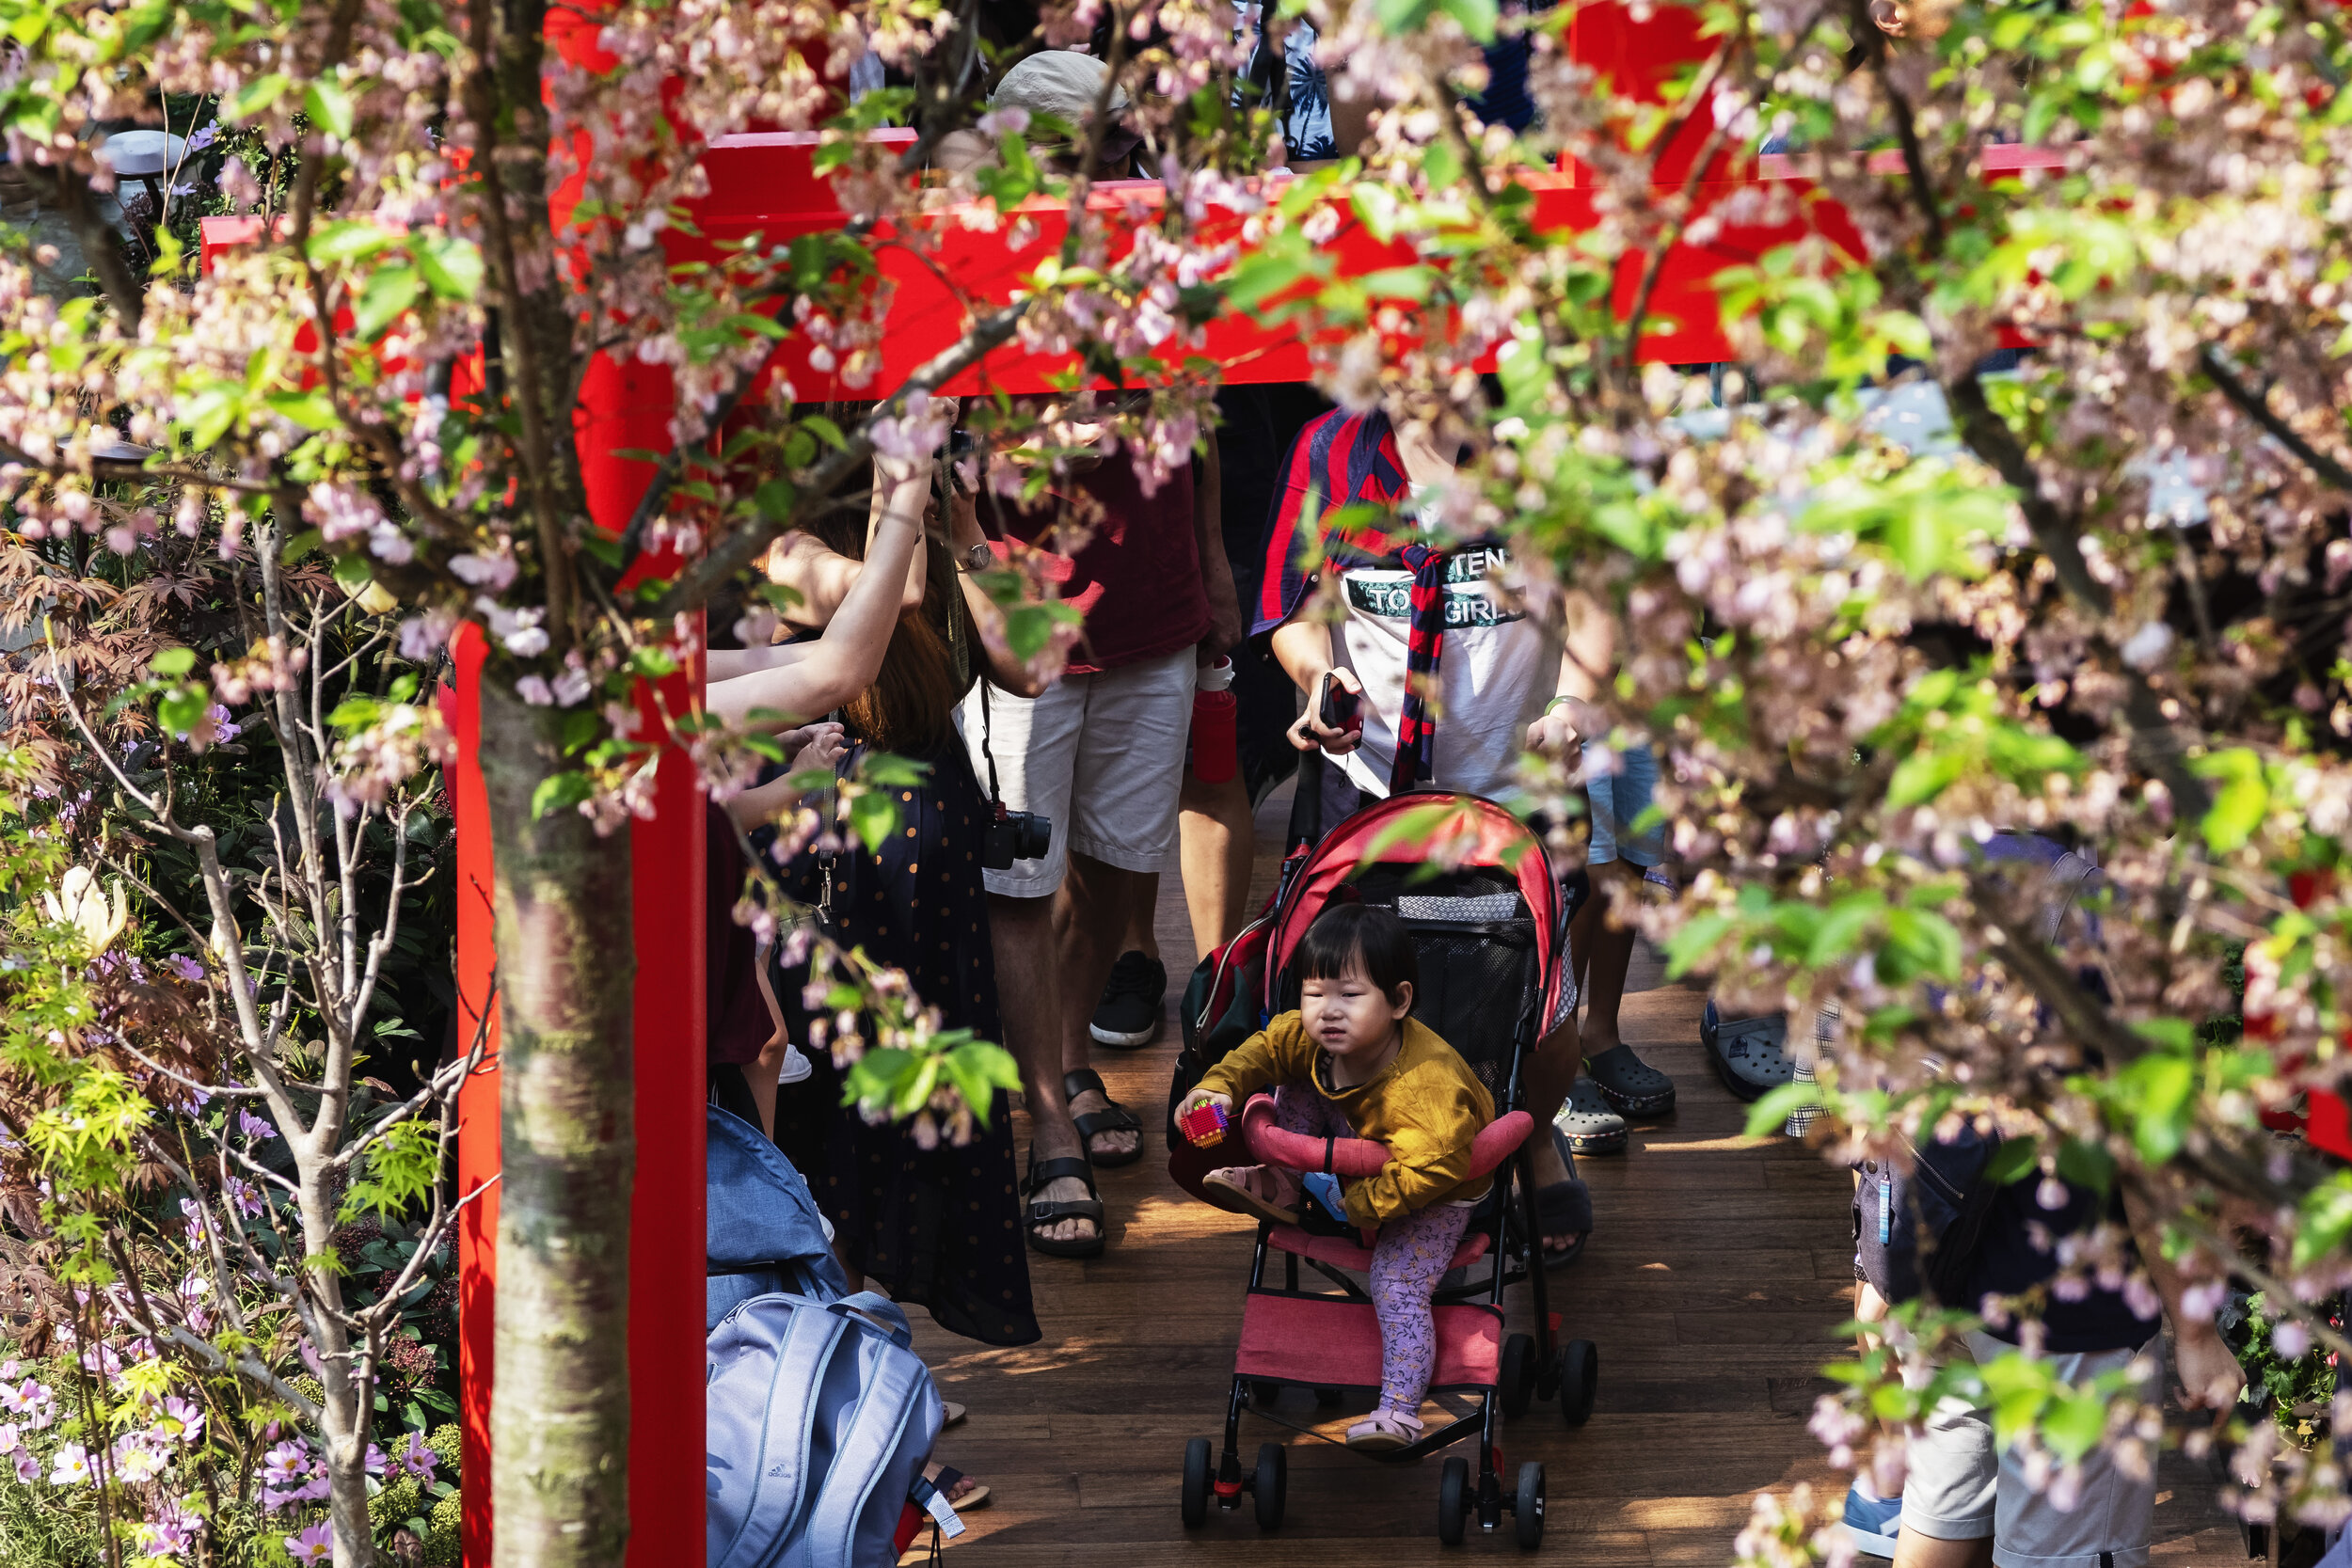  A child fidgets in a stroller while moving through the crowd during the Sakura Matsuri floral display at Gardens by the Bay in Singapore 